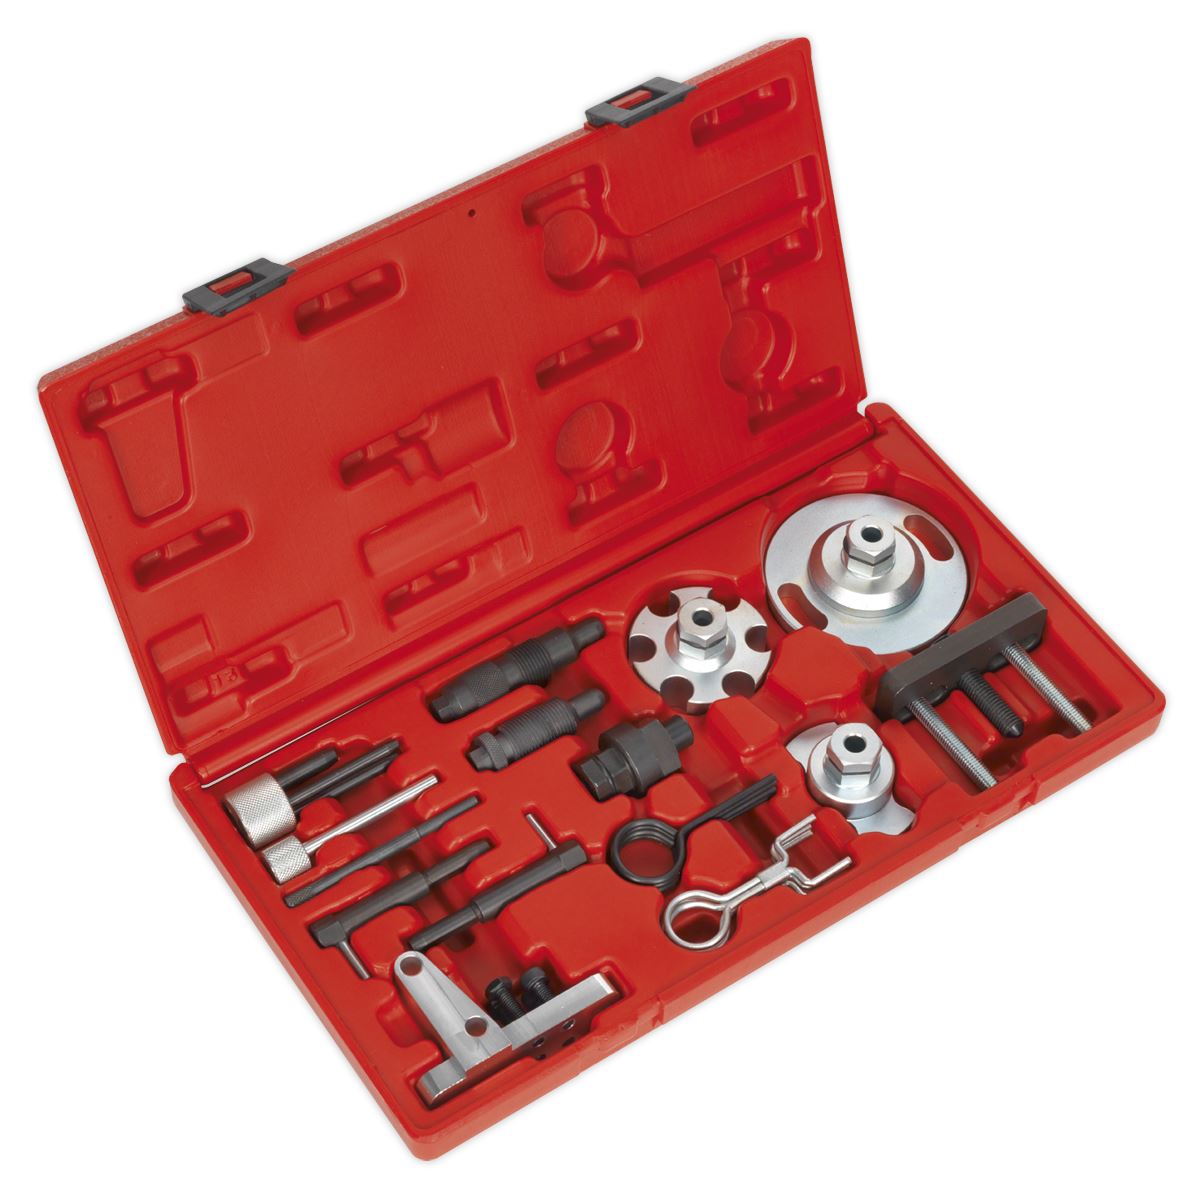 Sealey Diesel Engine Timing Tool & HP Pump Removal Kit - for VAG 2.7D/3.0D/4.0D/4.2D TDi - Chain Drive